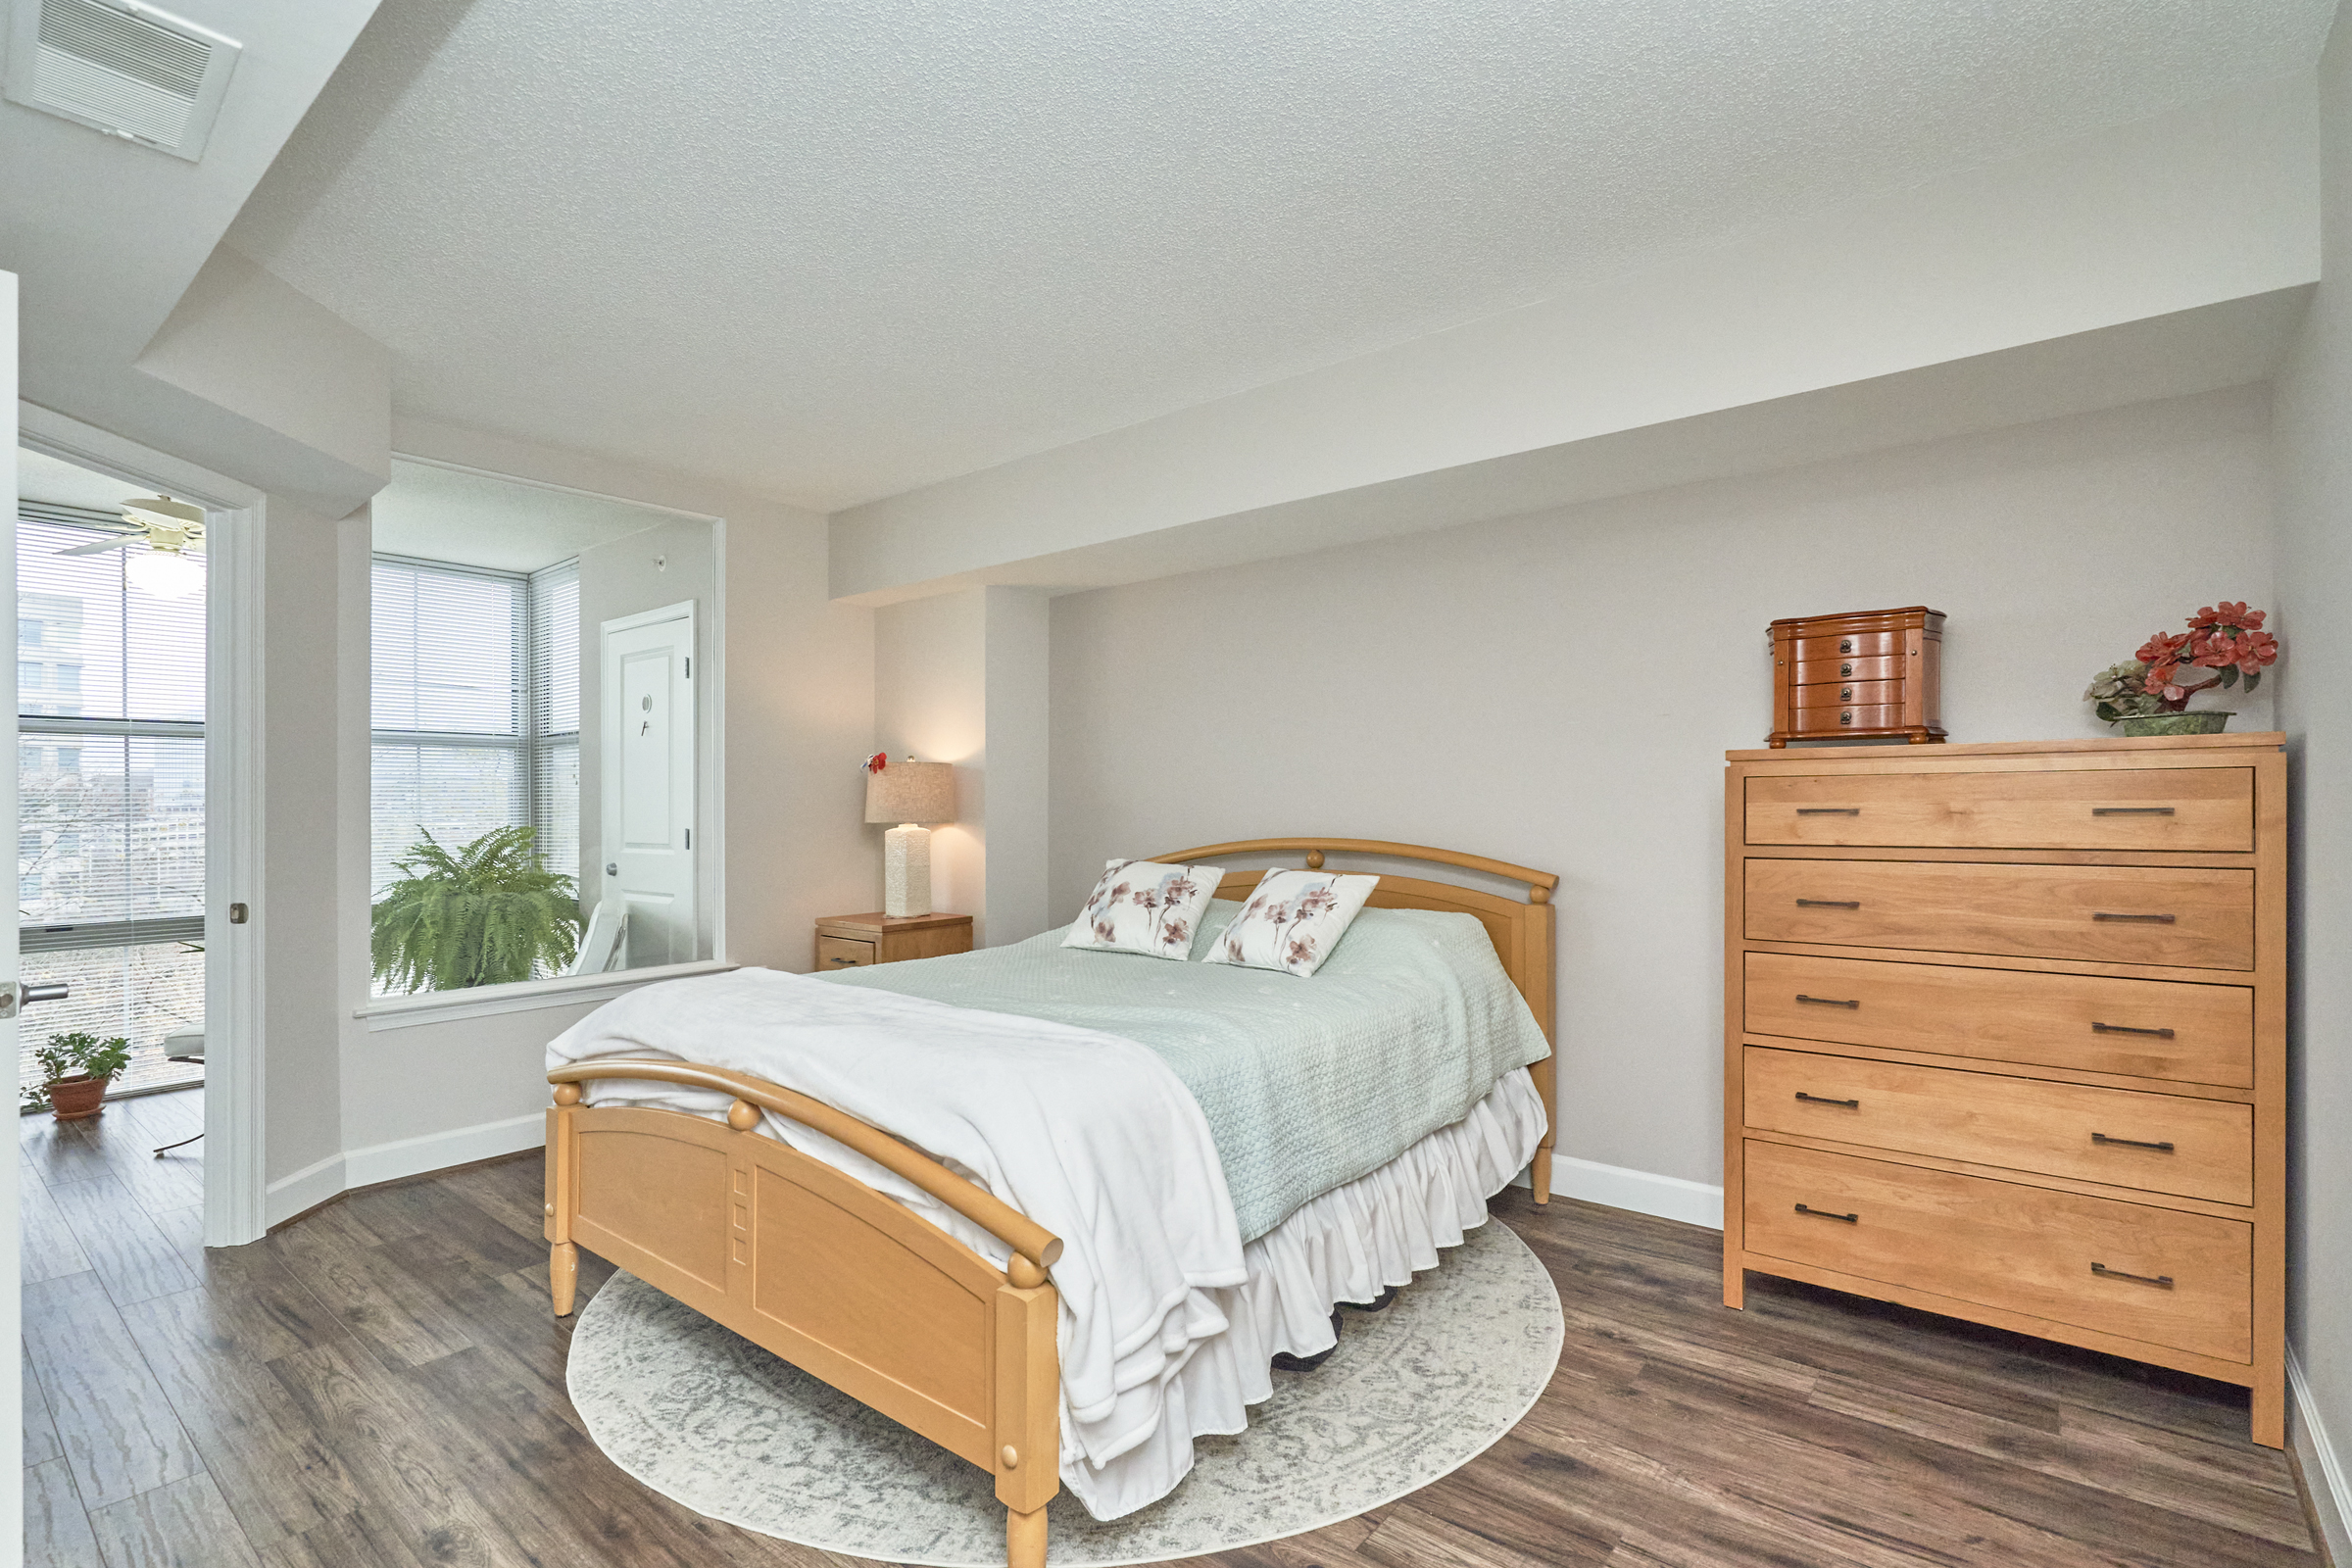 Interior professional photo of 11800 Sunset Hills Road Unit #811, showing one of the bedrooms with recessed ceiling, bed and dresser in the foreground, and view of the connected sunroom in the background/left angle